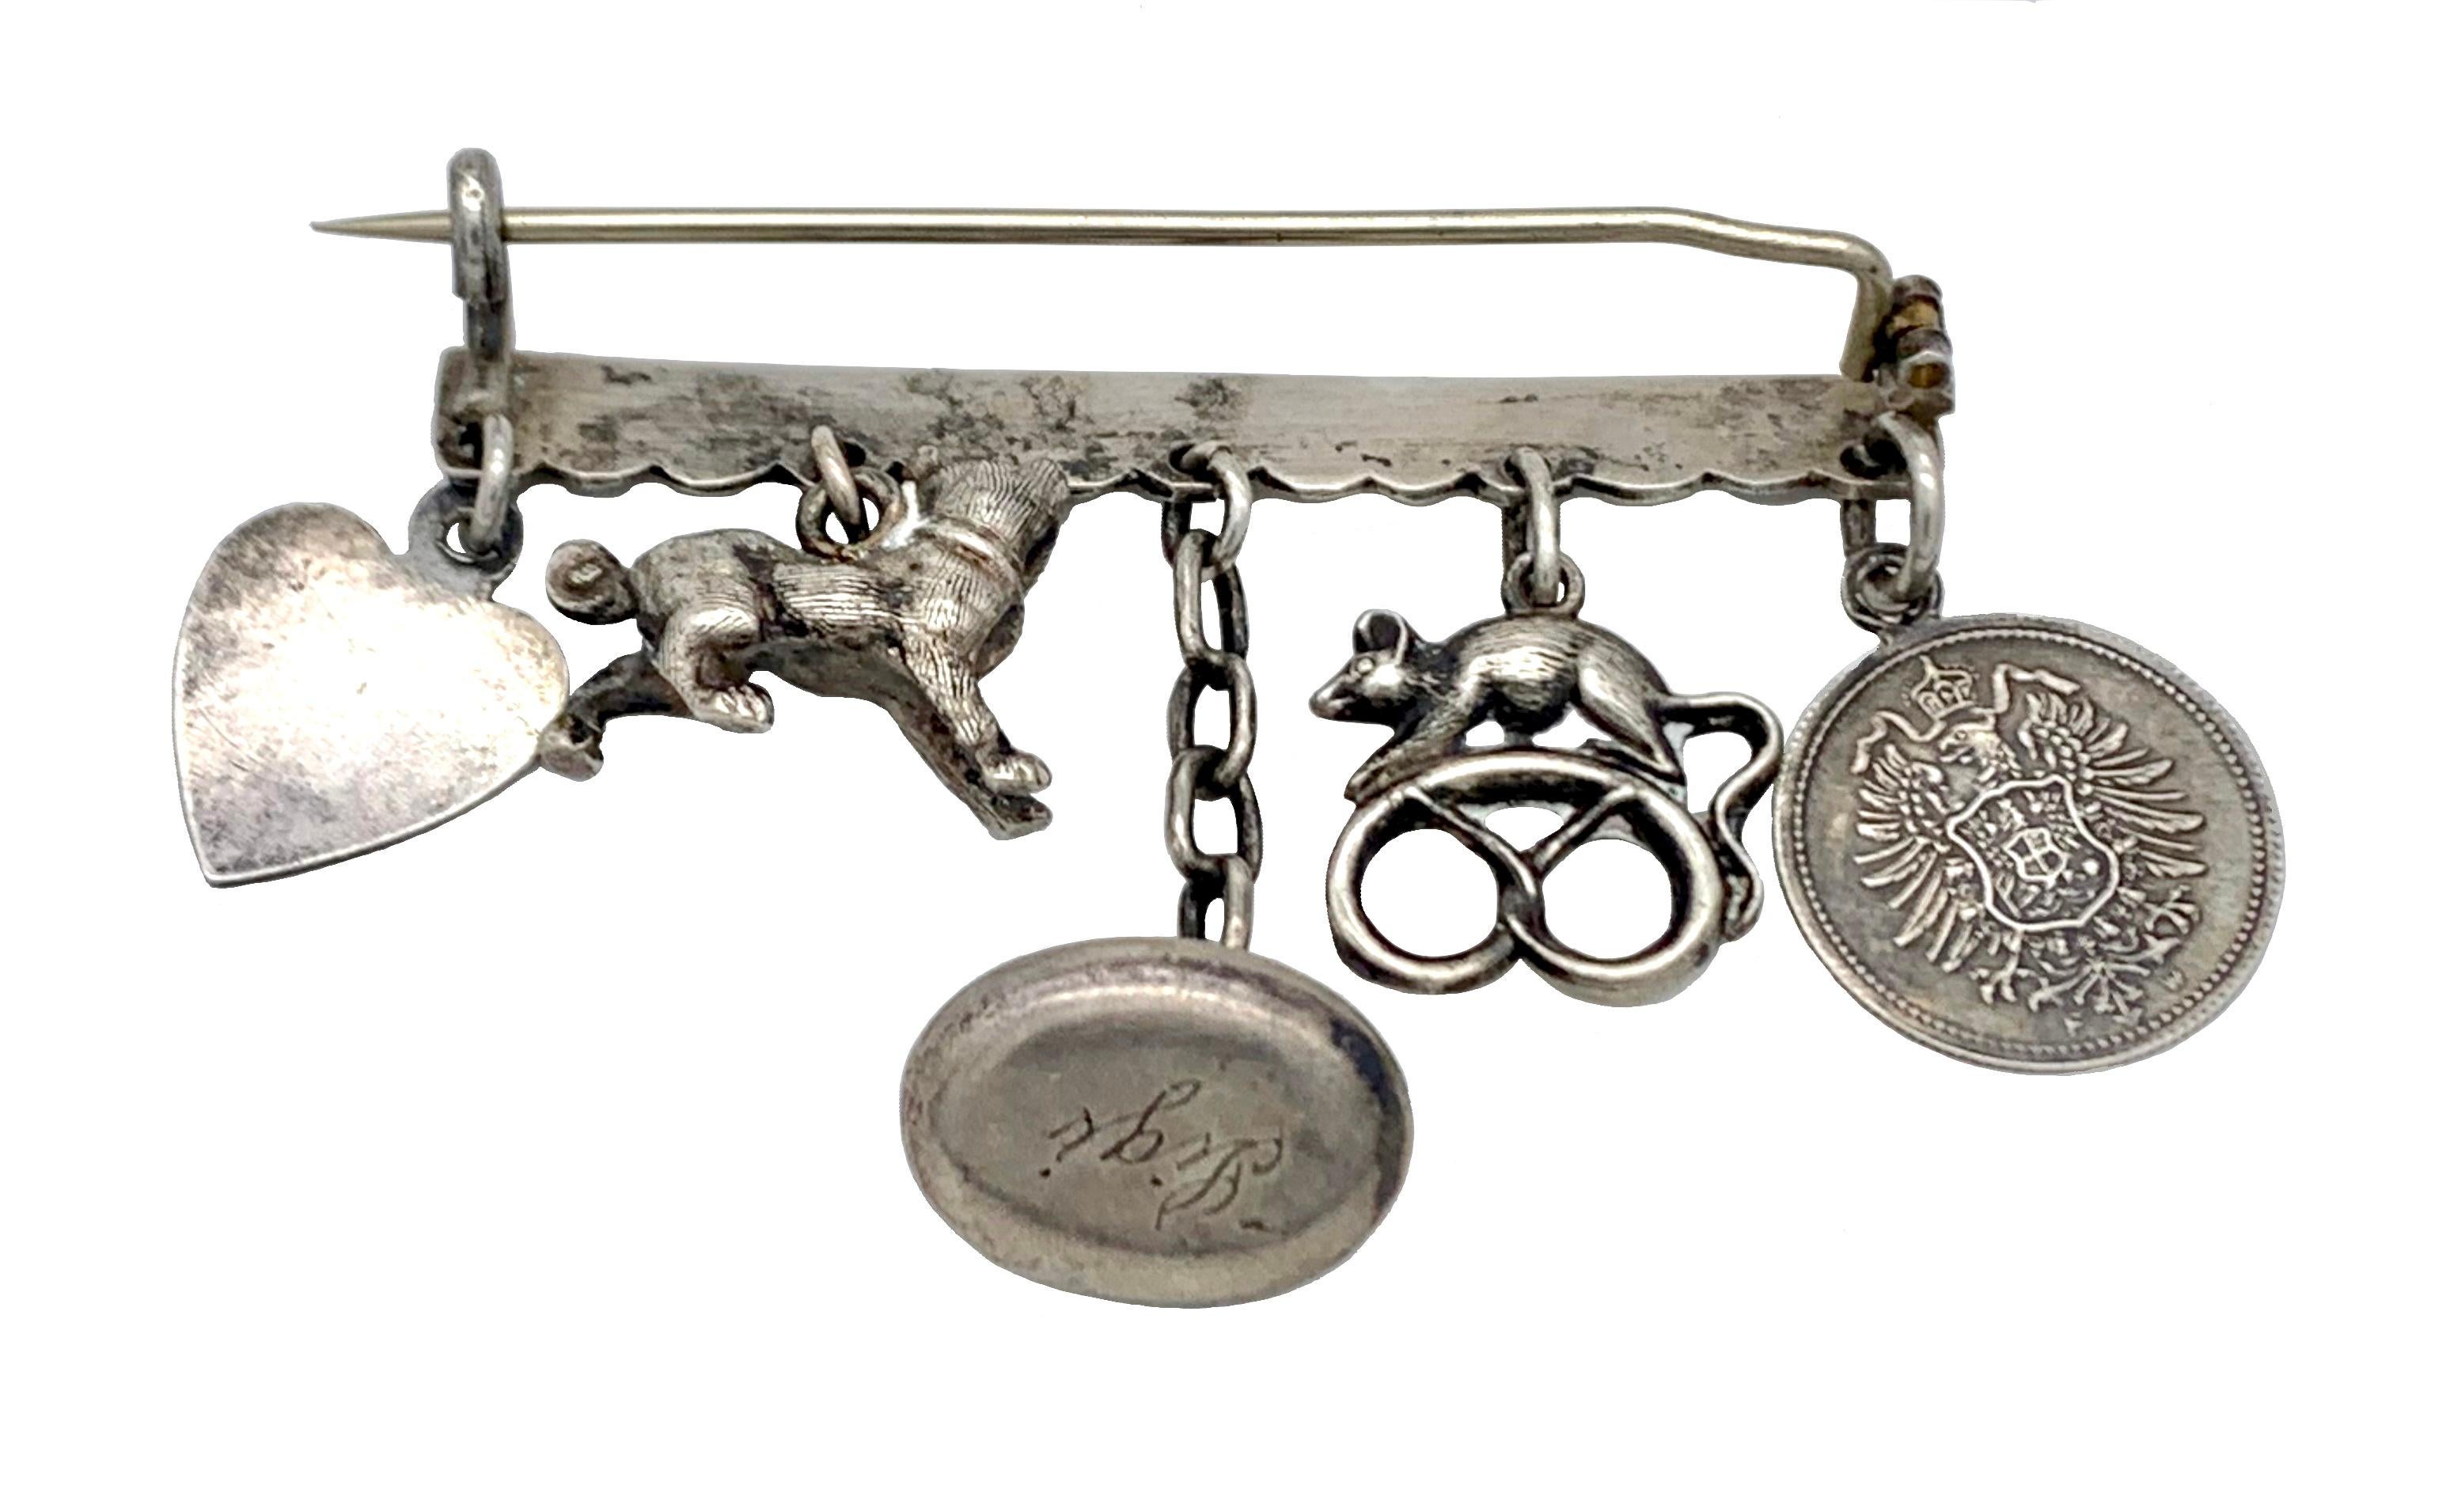 This charming silver brooch features a collection of articulated charms : a medal with Marie inscribed, a Mouse sitting on a pretzel, a bed pan with the name ski inscribed, a cat and a heart with the inscription' Behüt dich Gott' (may god protect